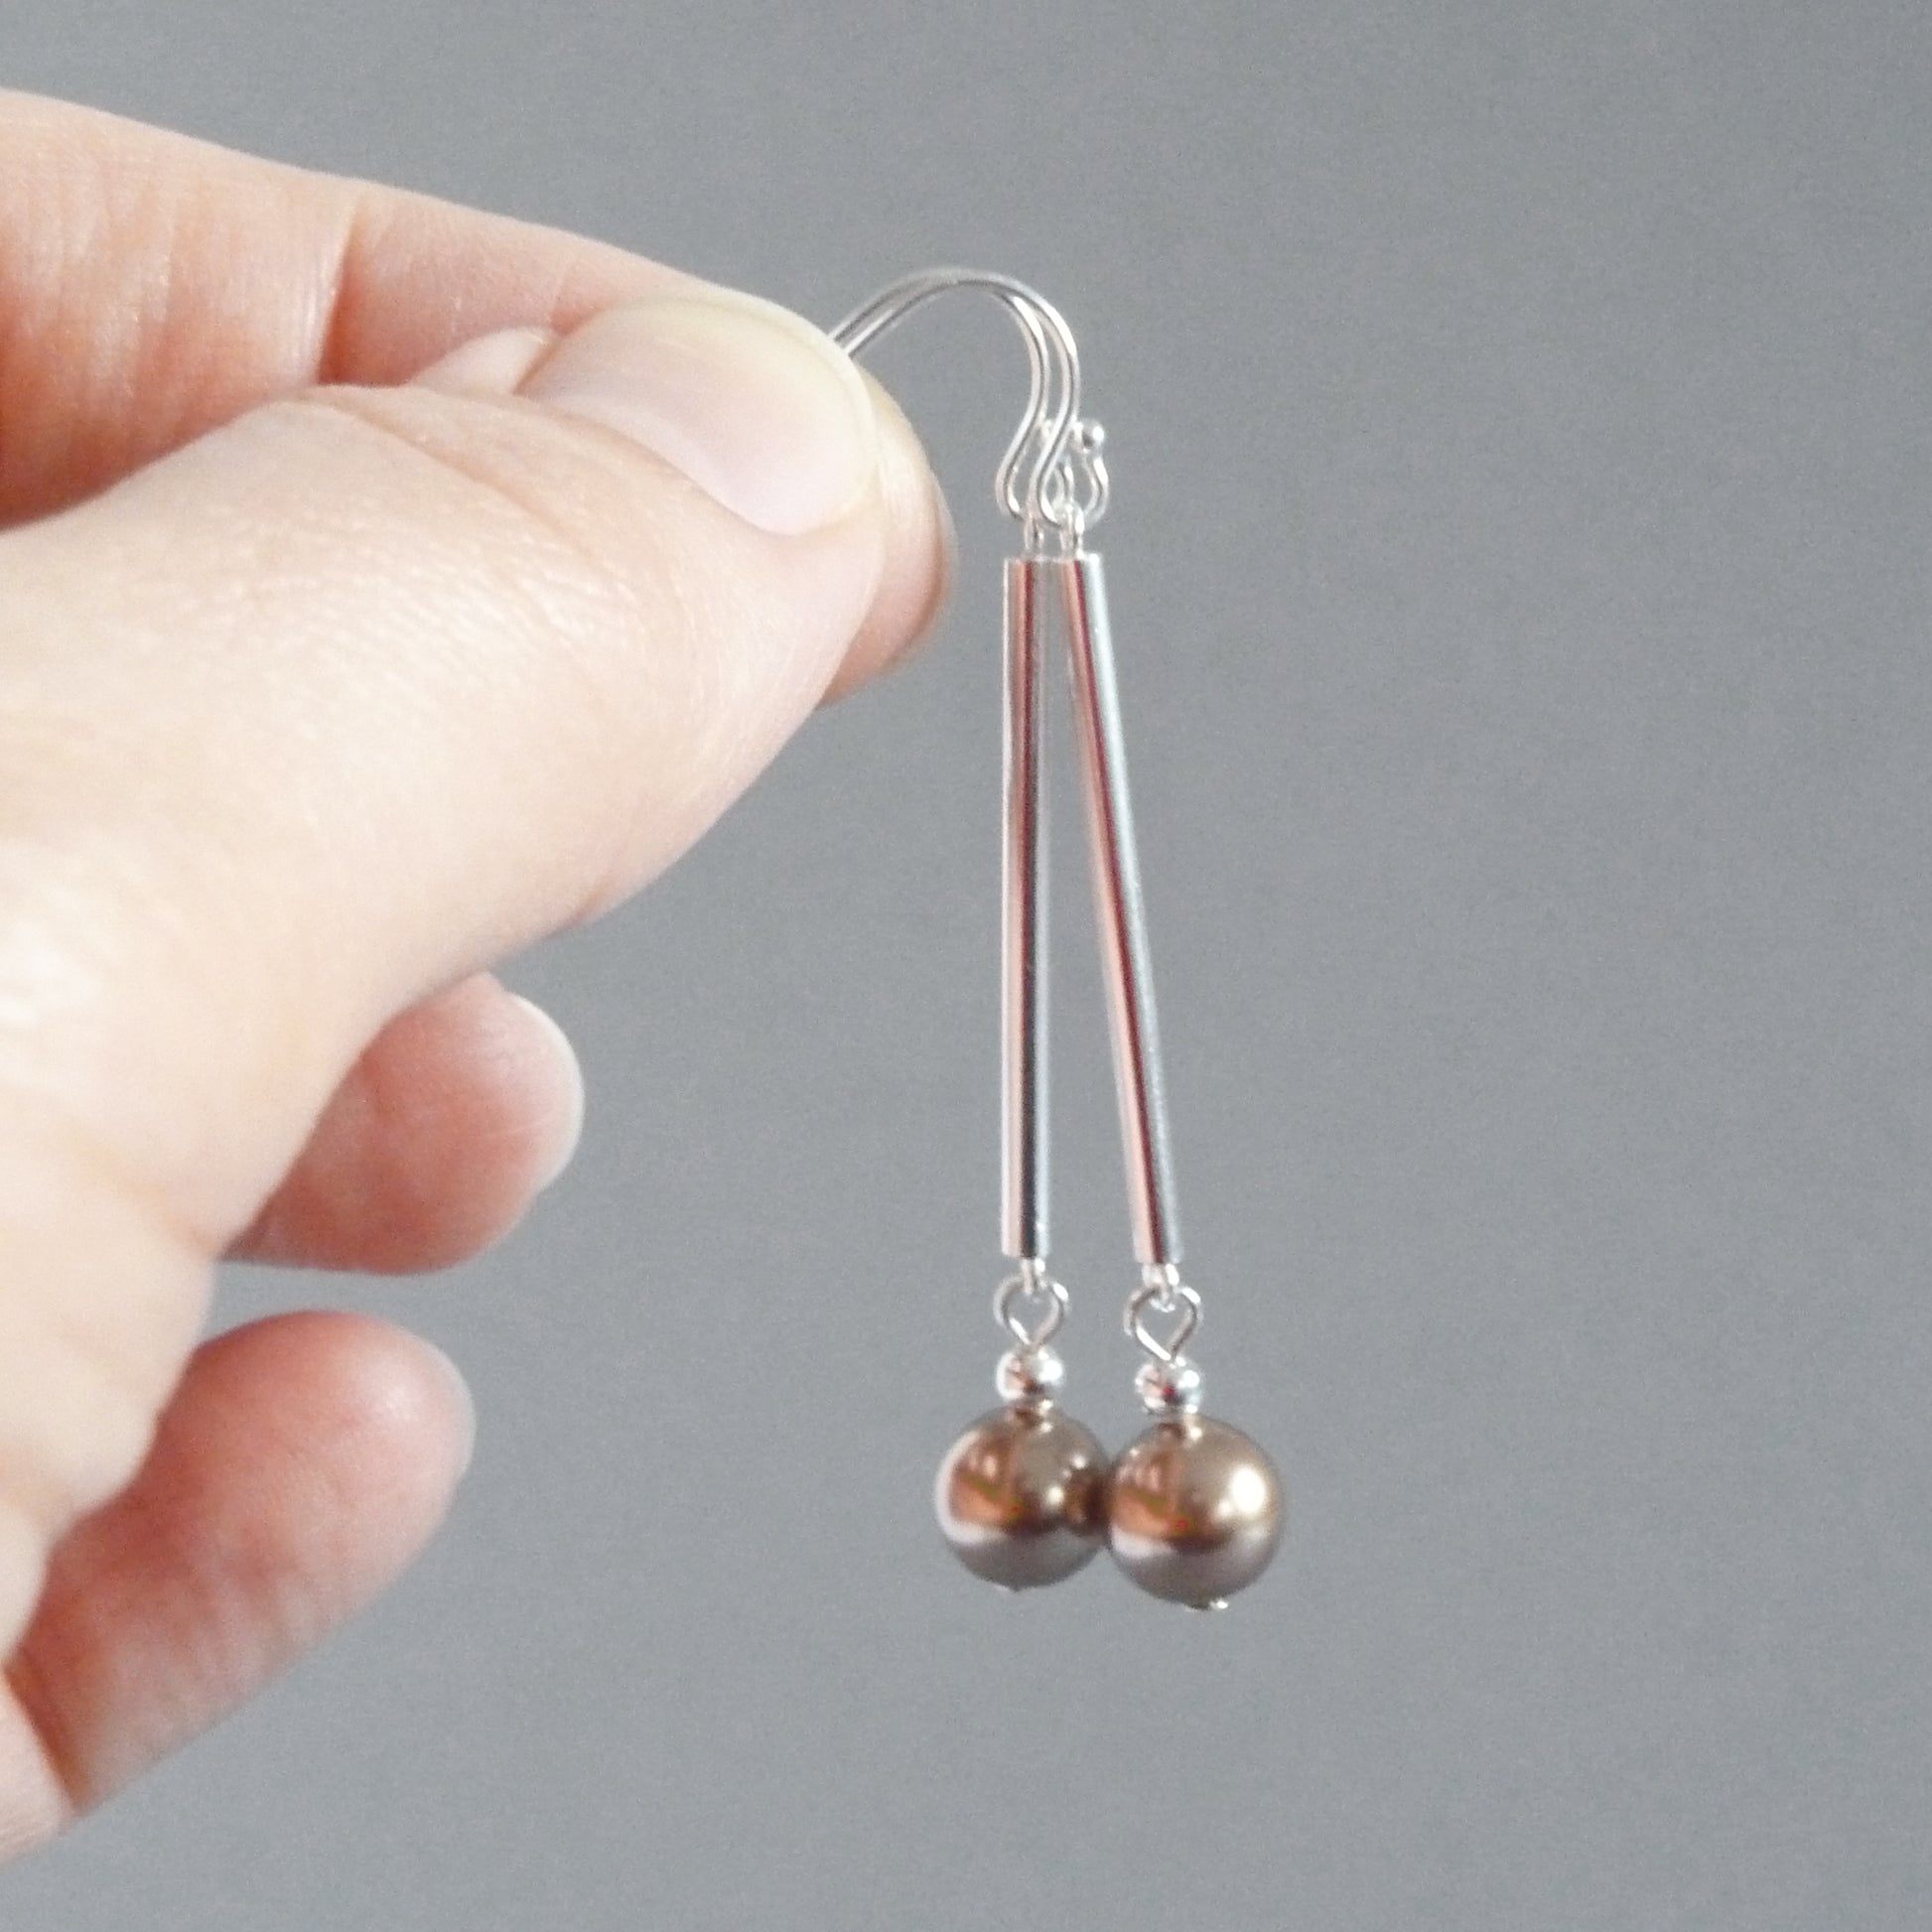 Sterling silver and bronze pearl earrings